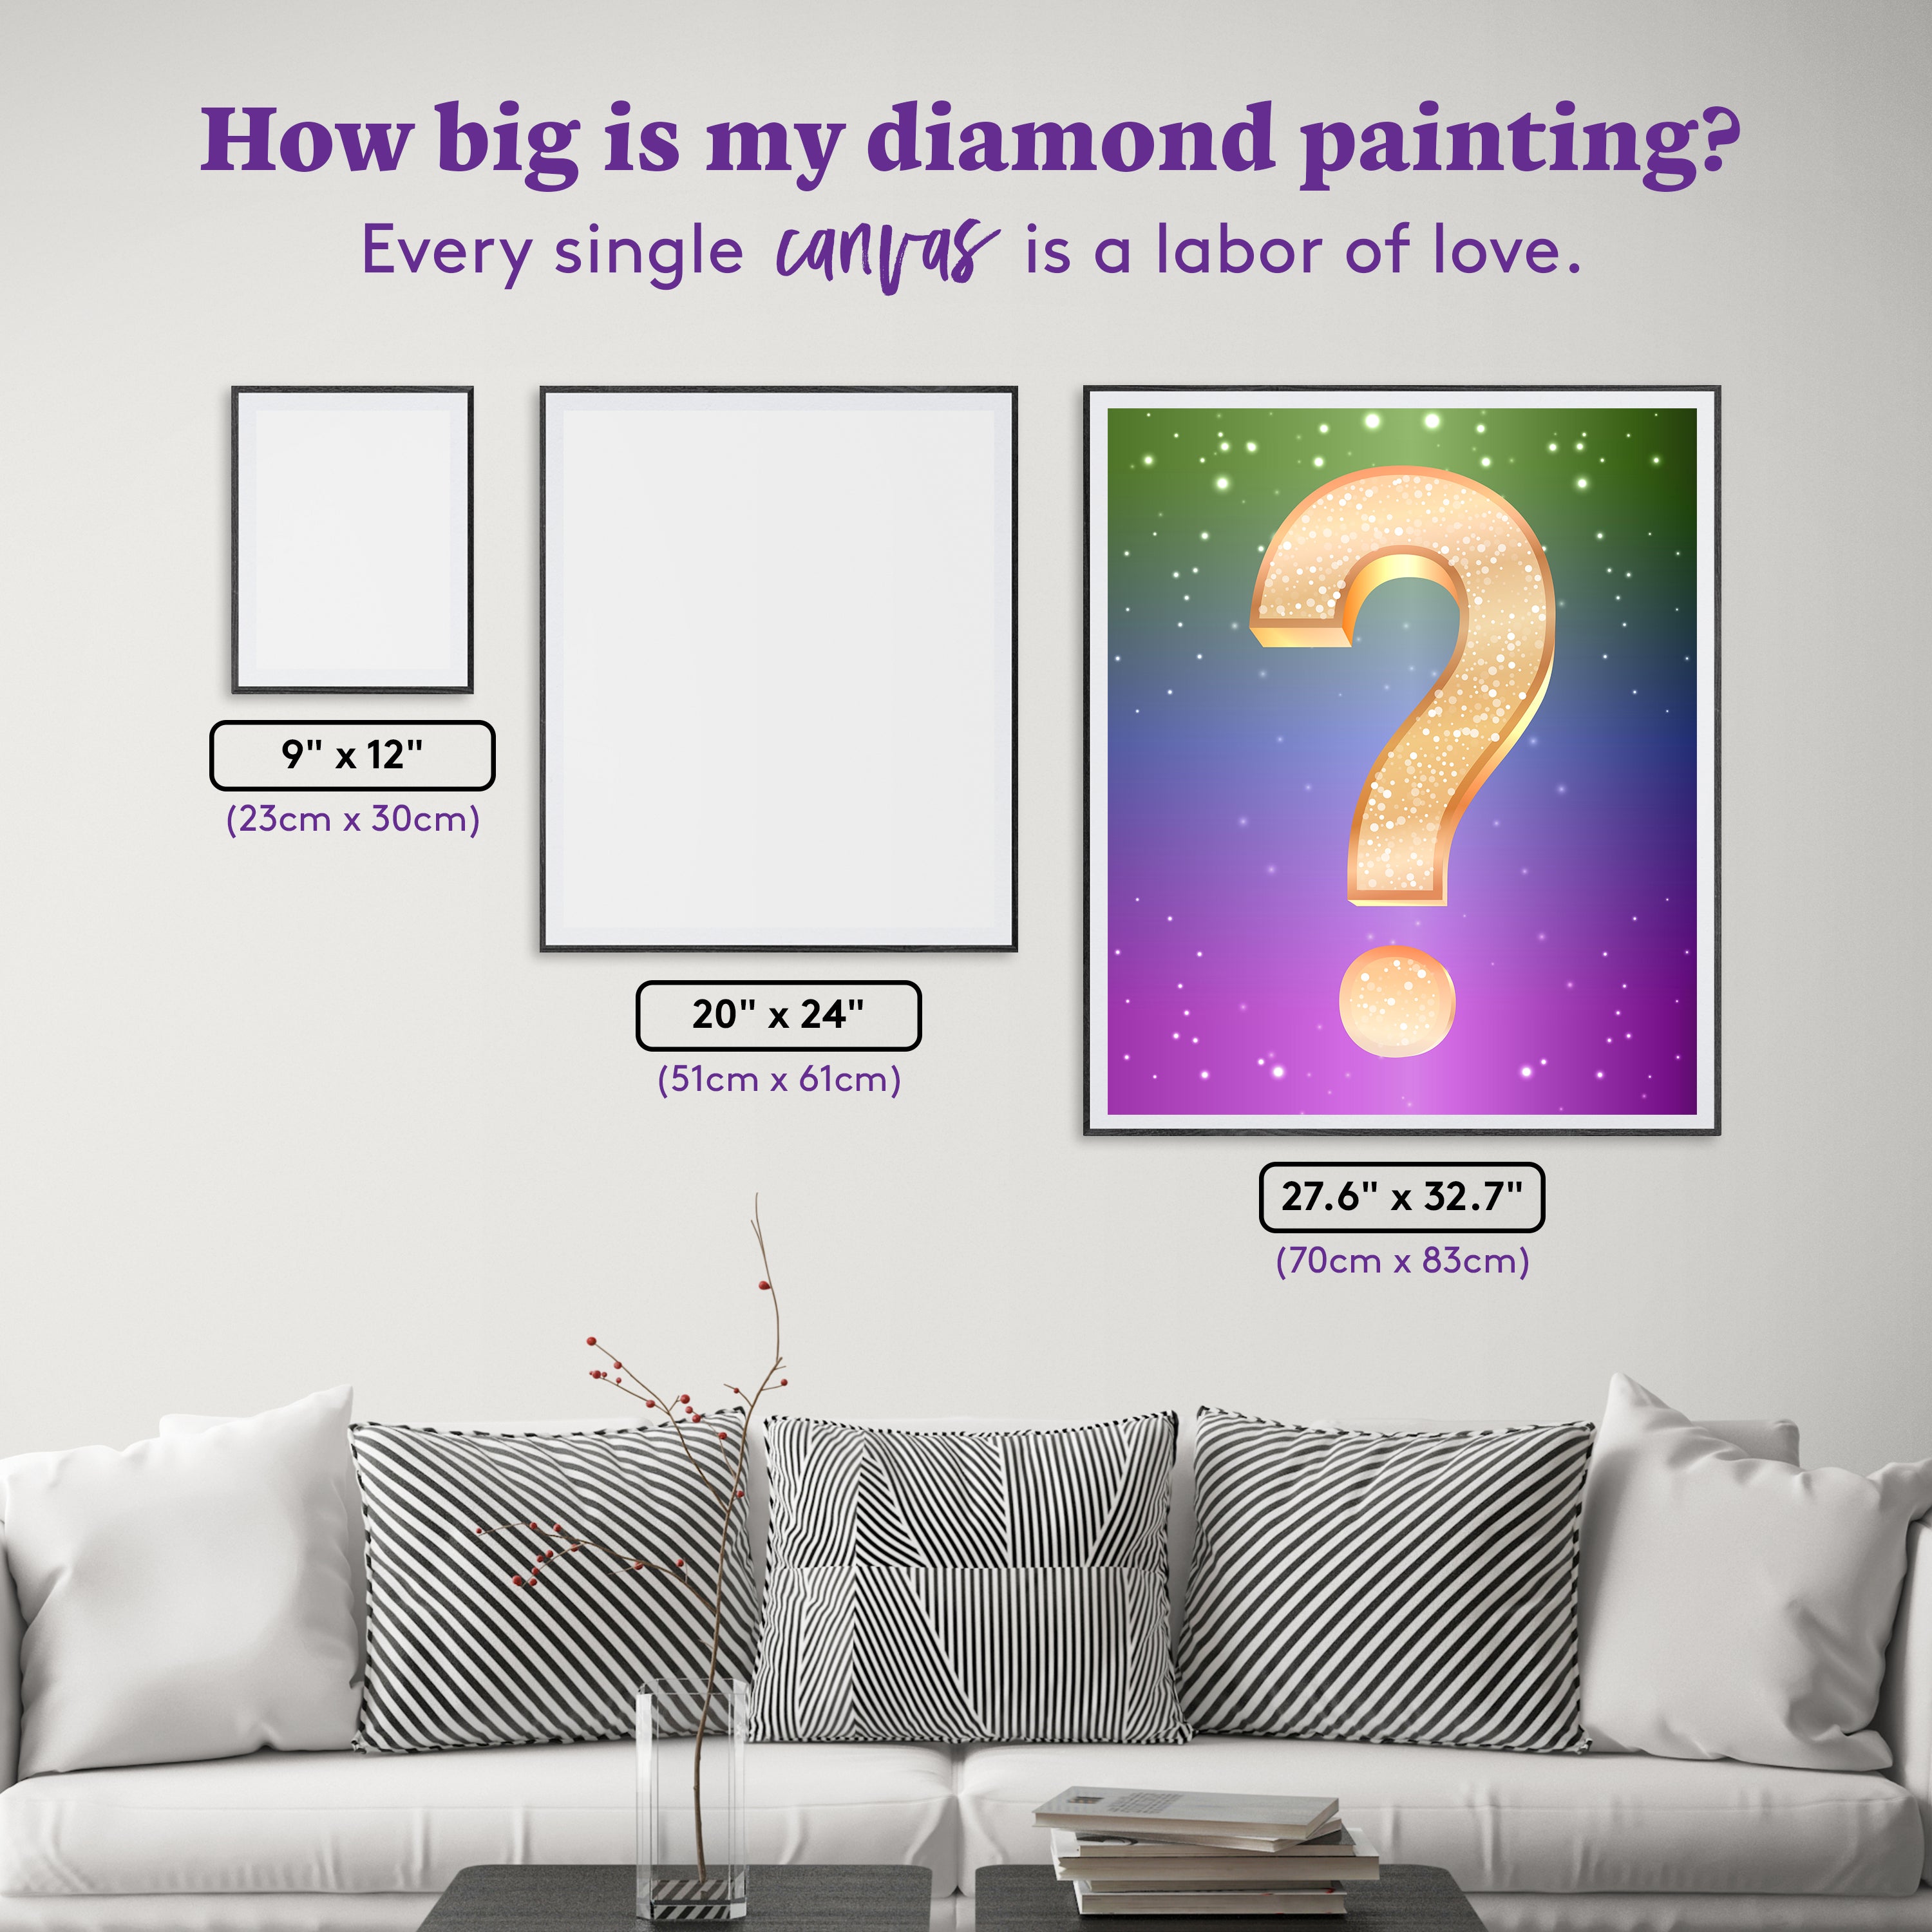 Best place to buy extra large kits? : r/diamondpainting